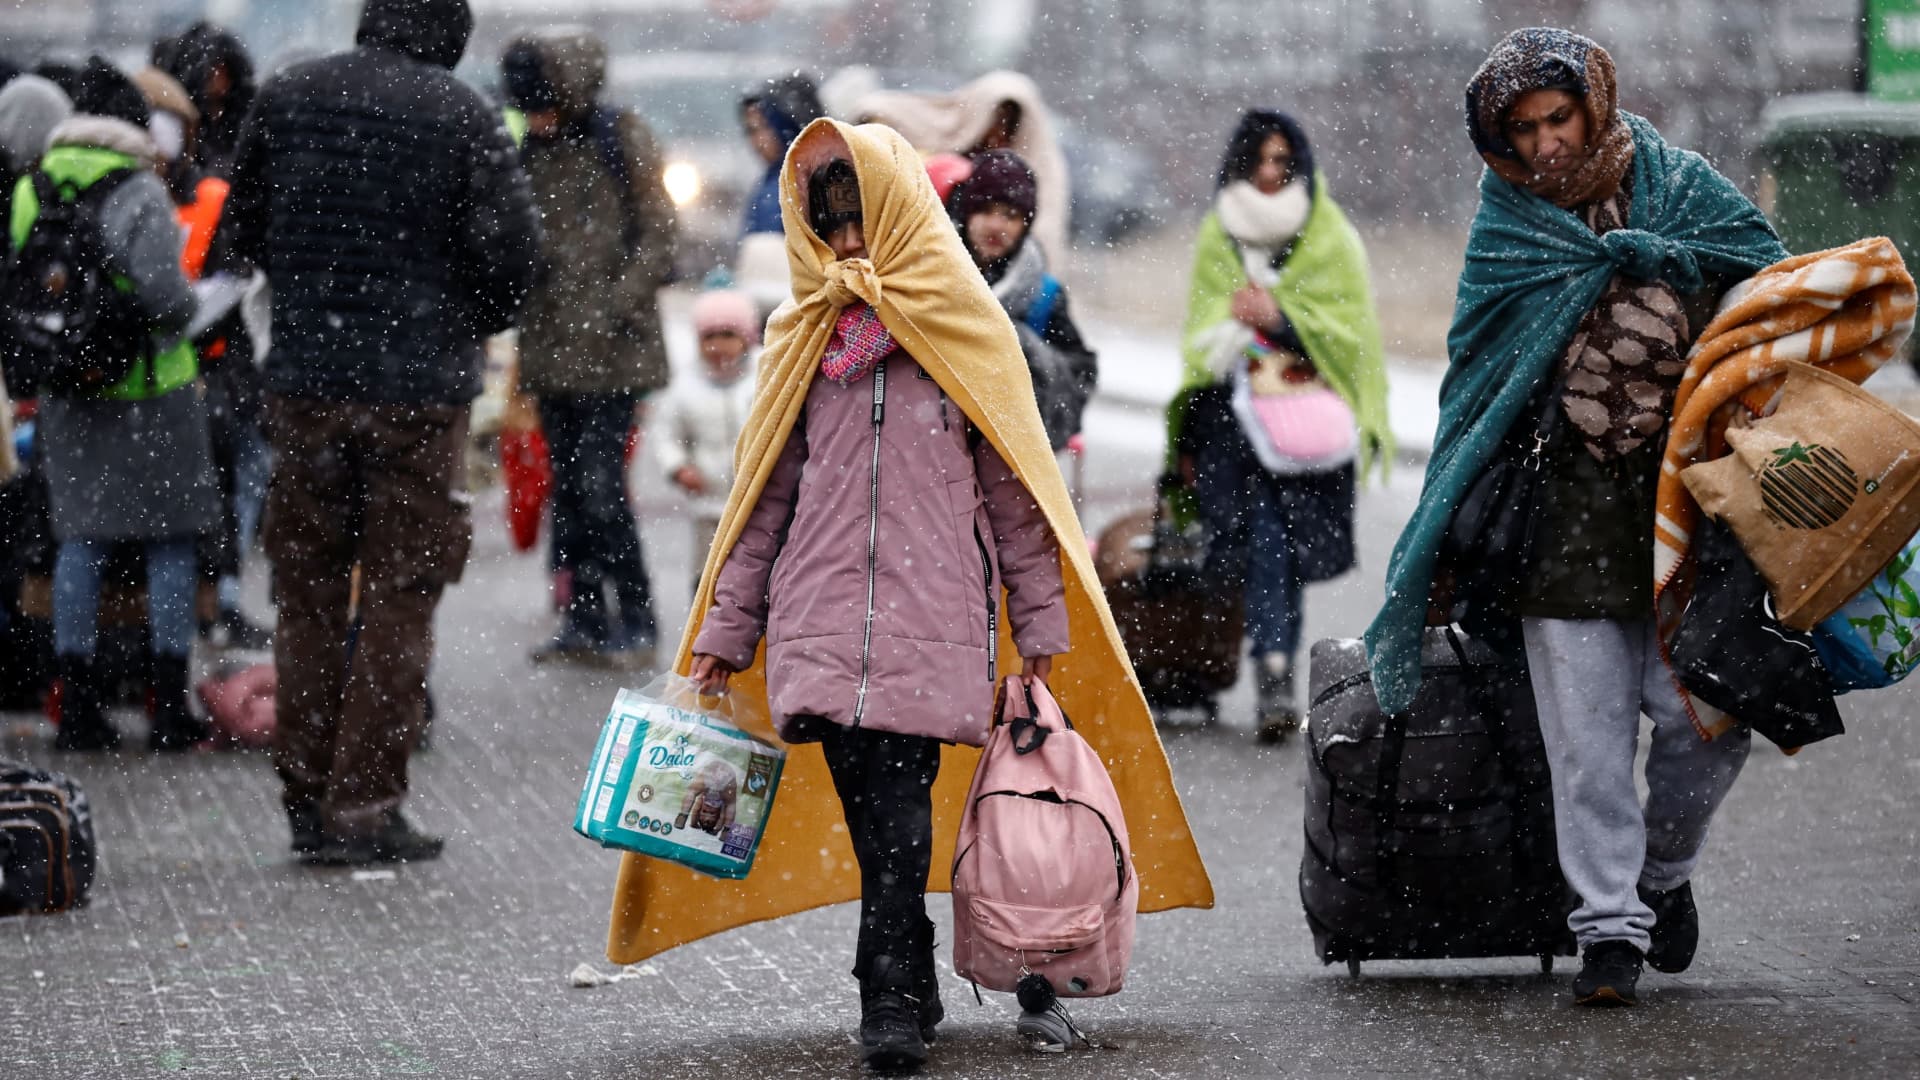 People fleeing Russian invasion of Ukraine arrive at a temporary camp in Przemysl, Poland, February 28, 2022. i